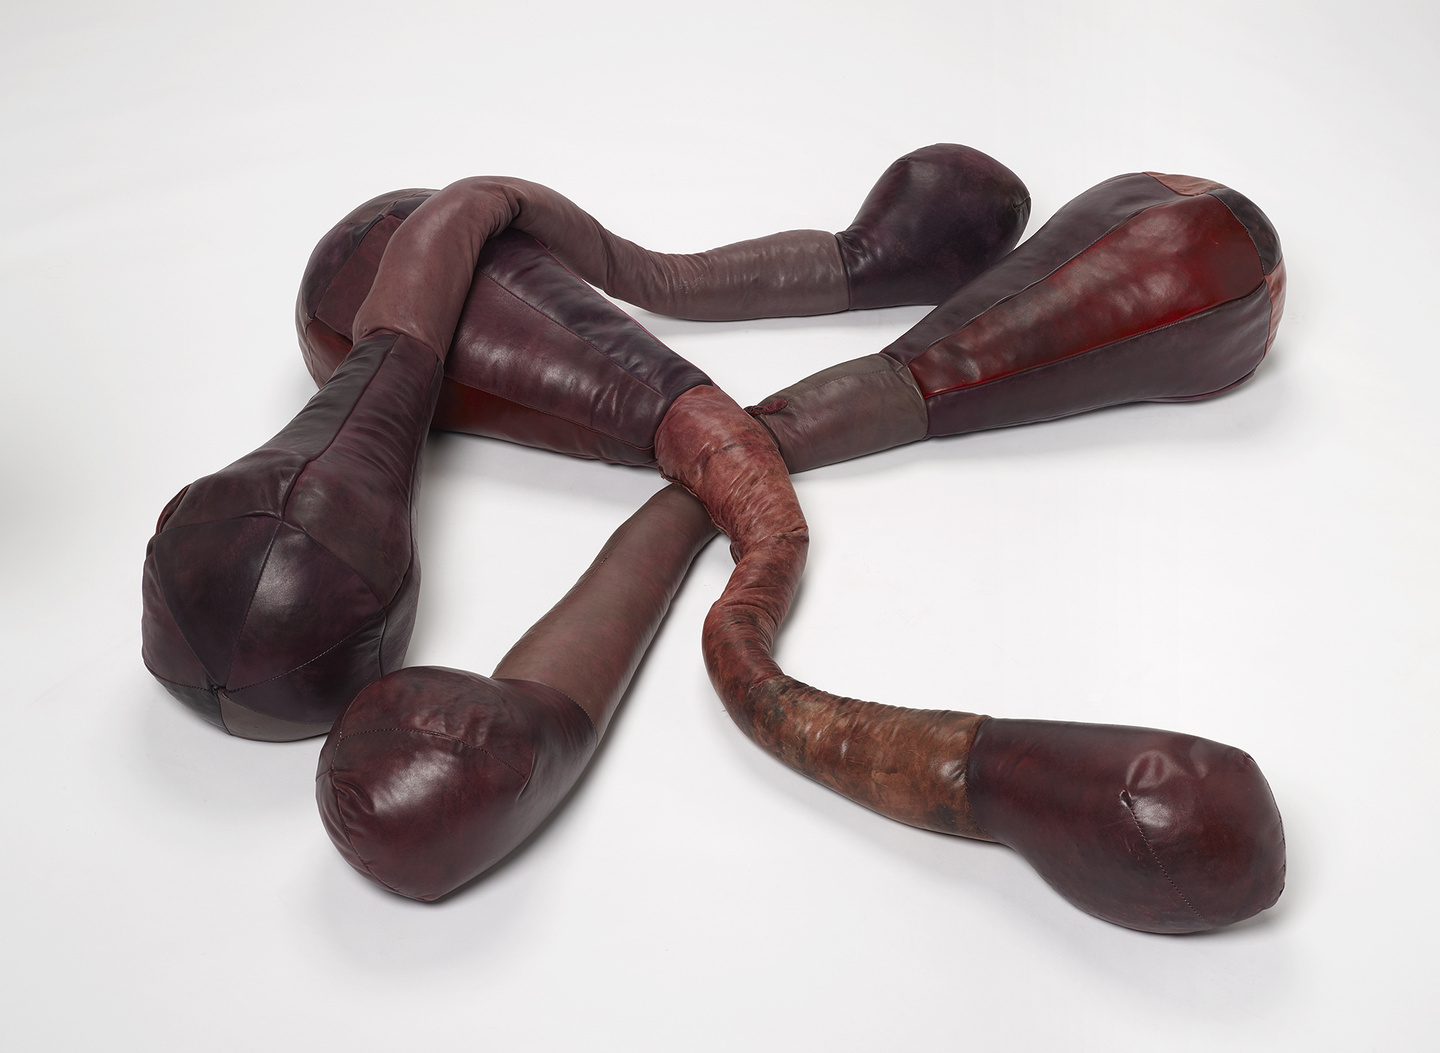 A large, soft sculpture comprises three wormlike structures laid on top of each other in various angles. Their outer material is leather painted deep shades of brown. They are displayed against a white background and floor.